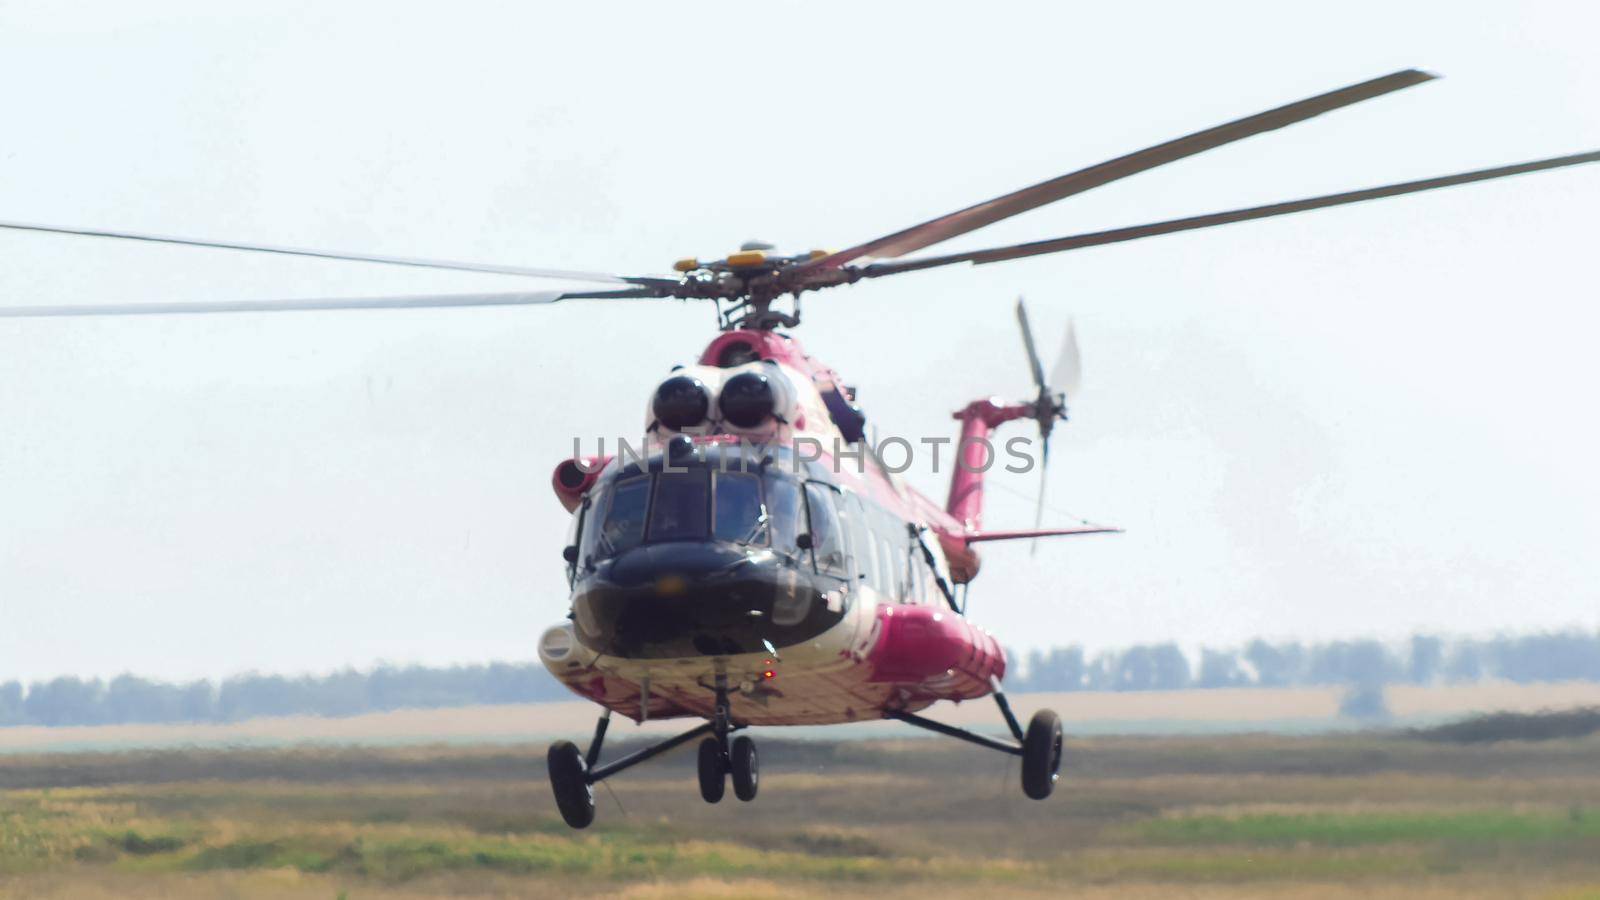 Modern emergency medicine helicopter take off at airfield by Studia72